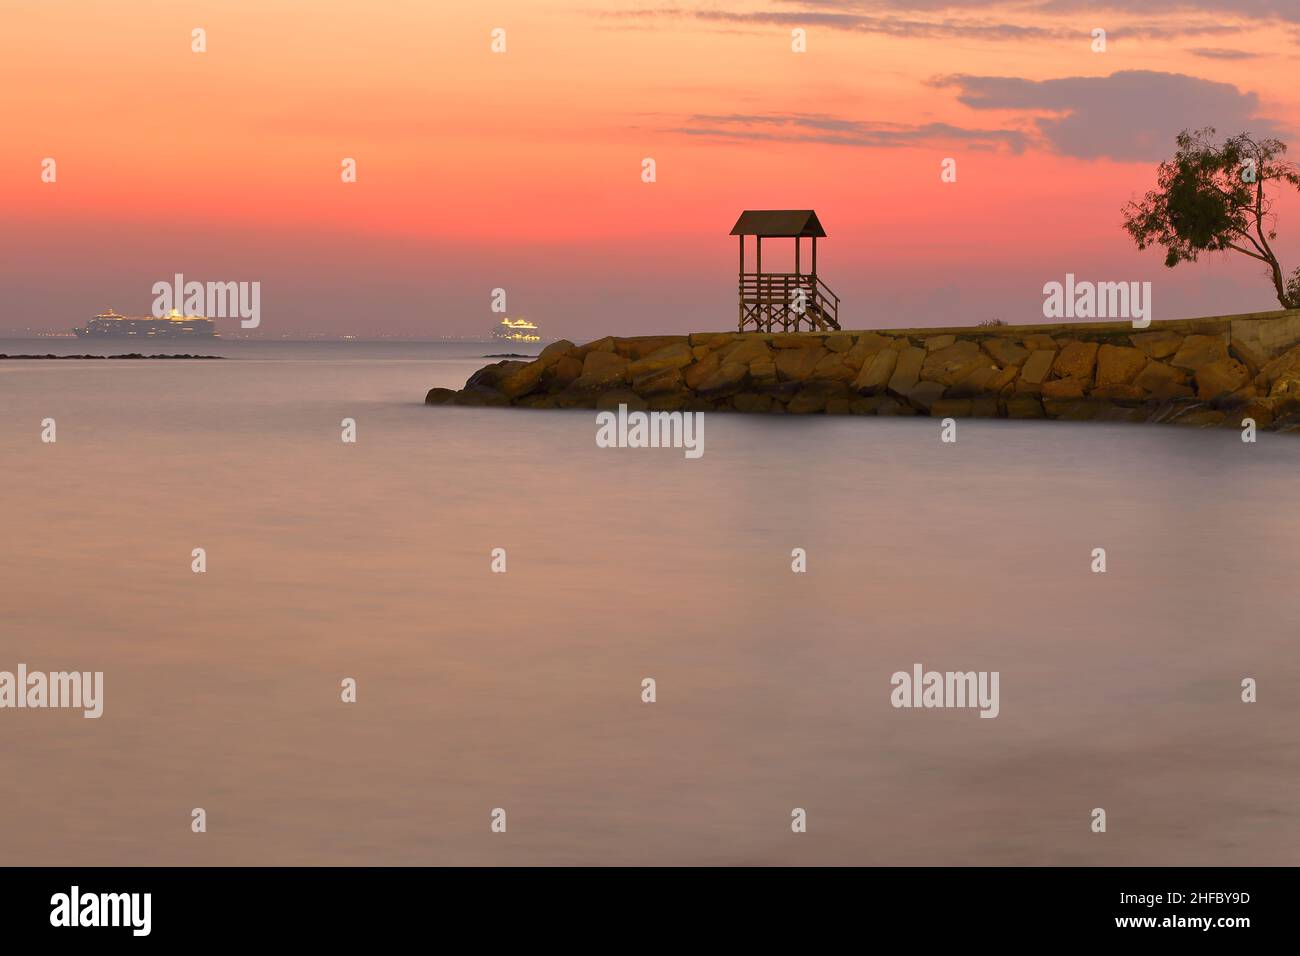 Seascape with Mediterranean island at sunset time Stock Photo